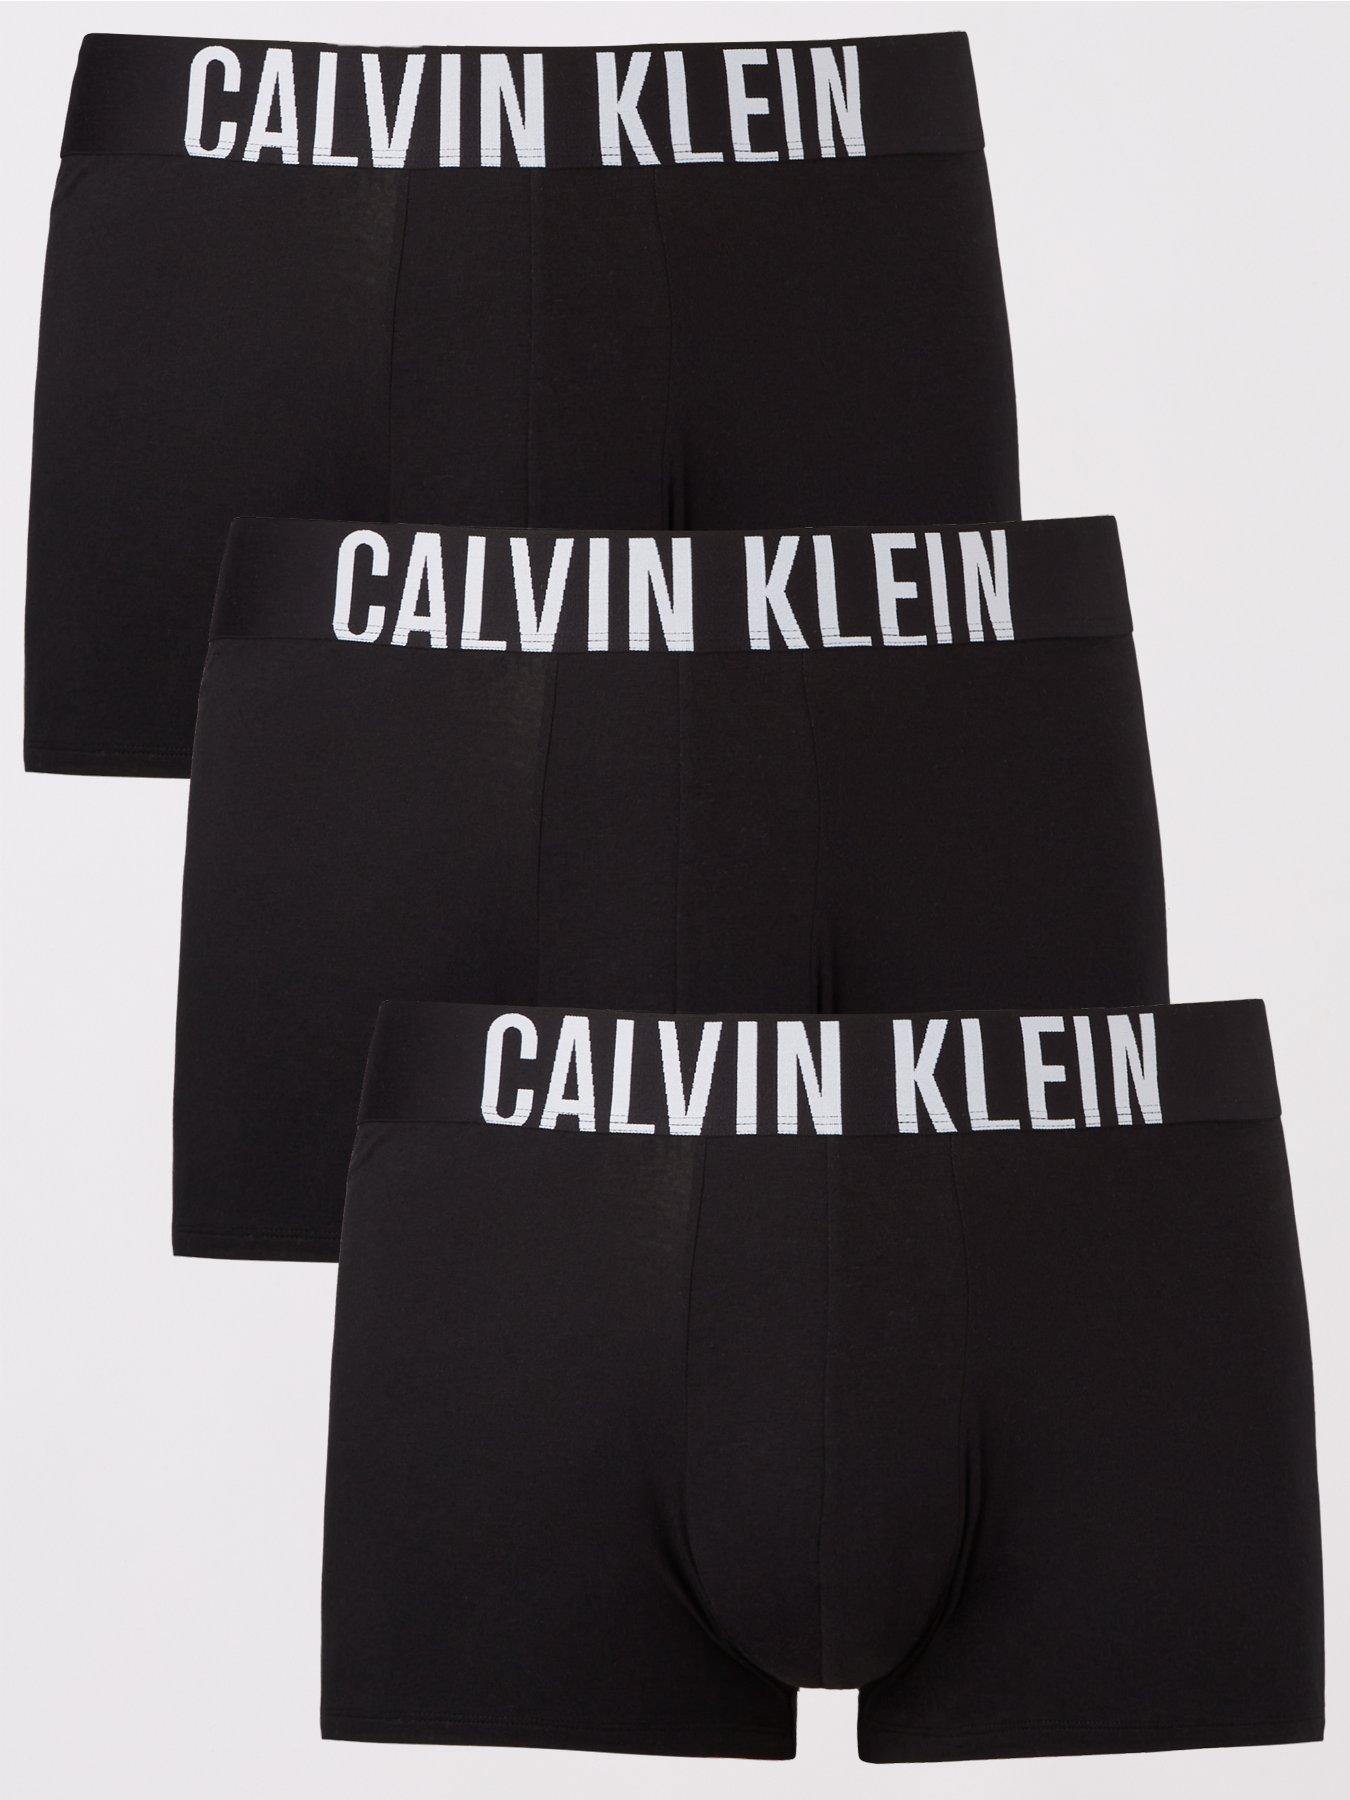 Slide View: 2: Calvin Klein Trunk  Boxers for women, Boxers outfit female,  Boxers women